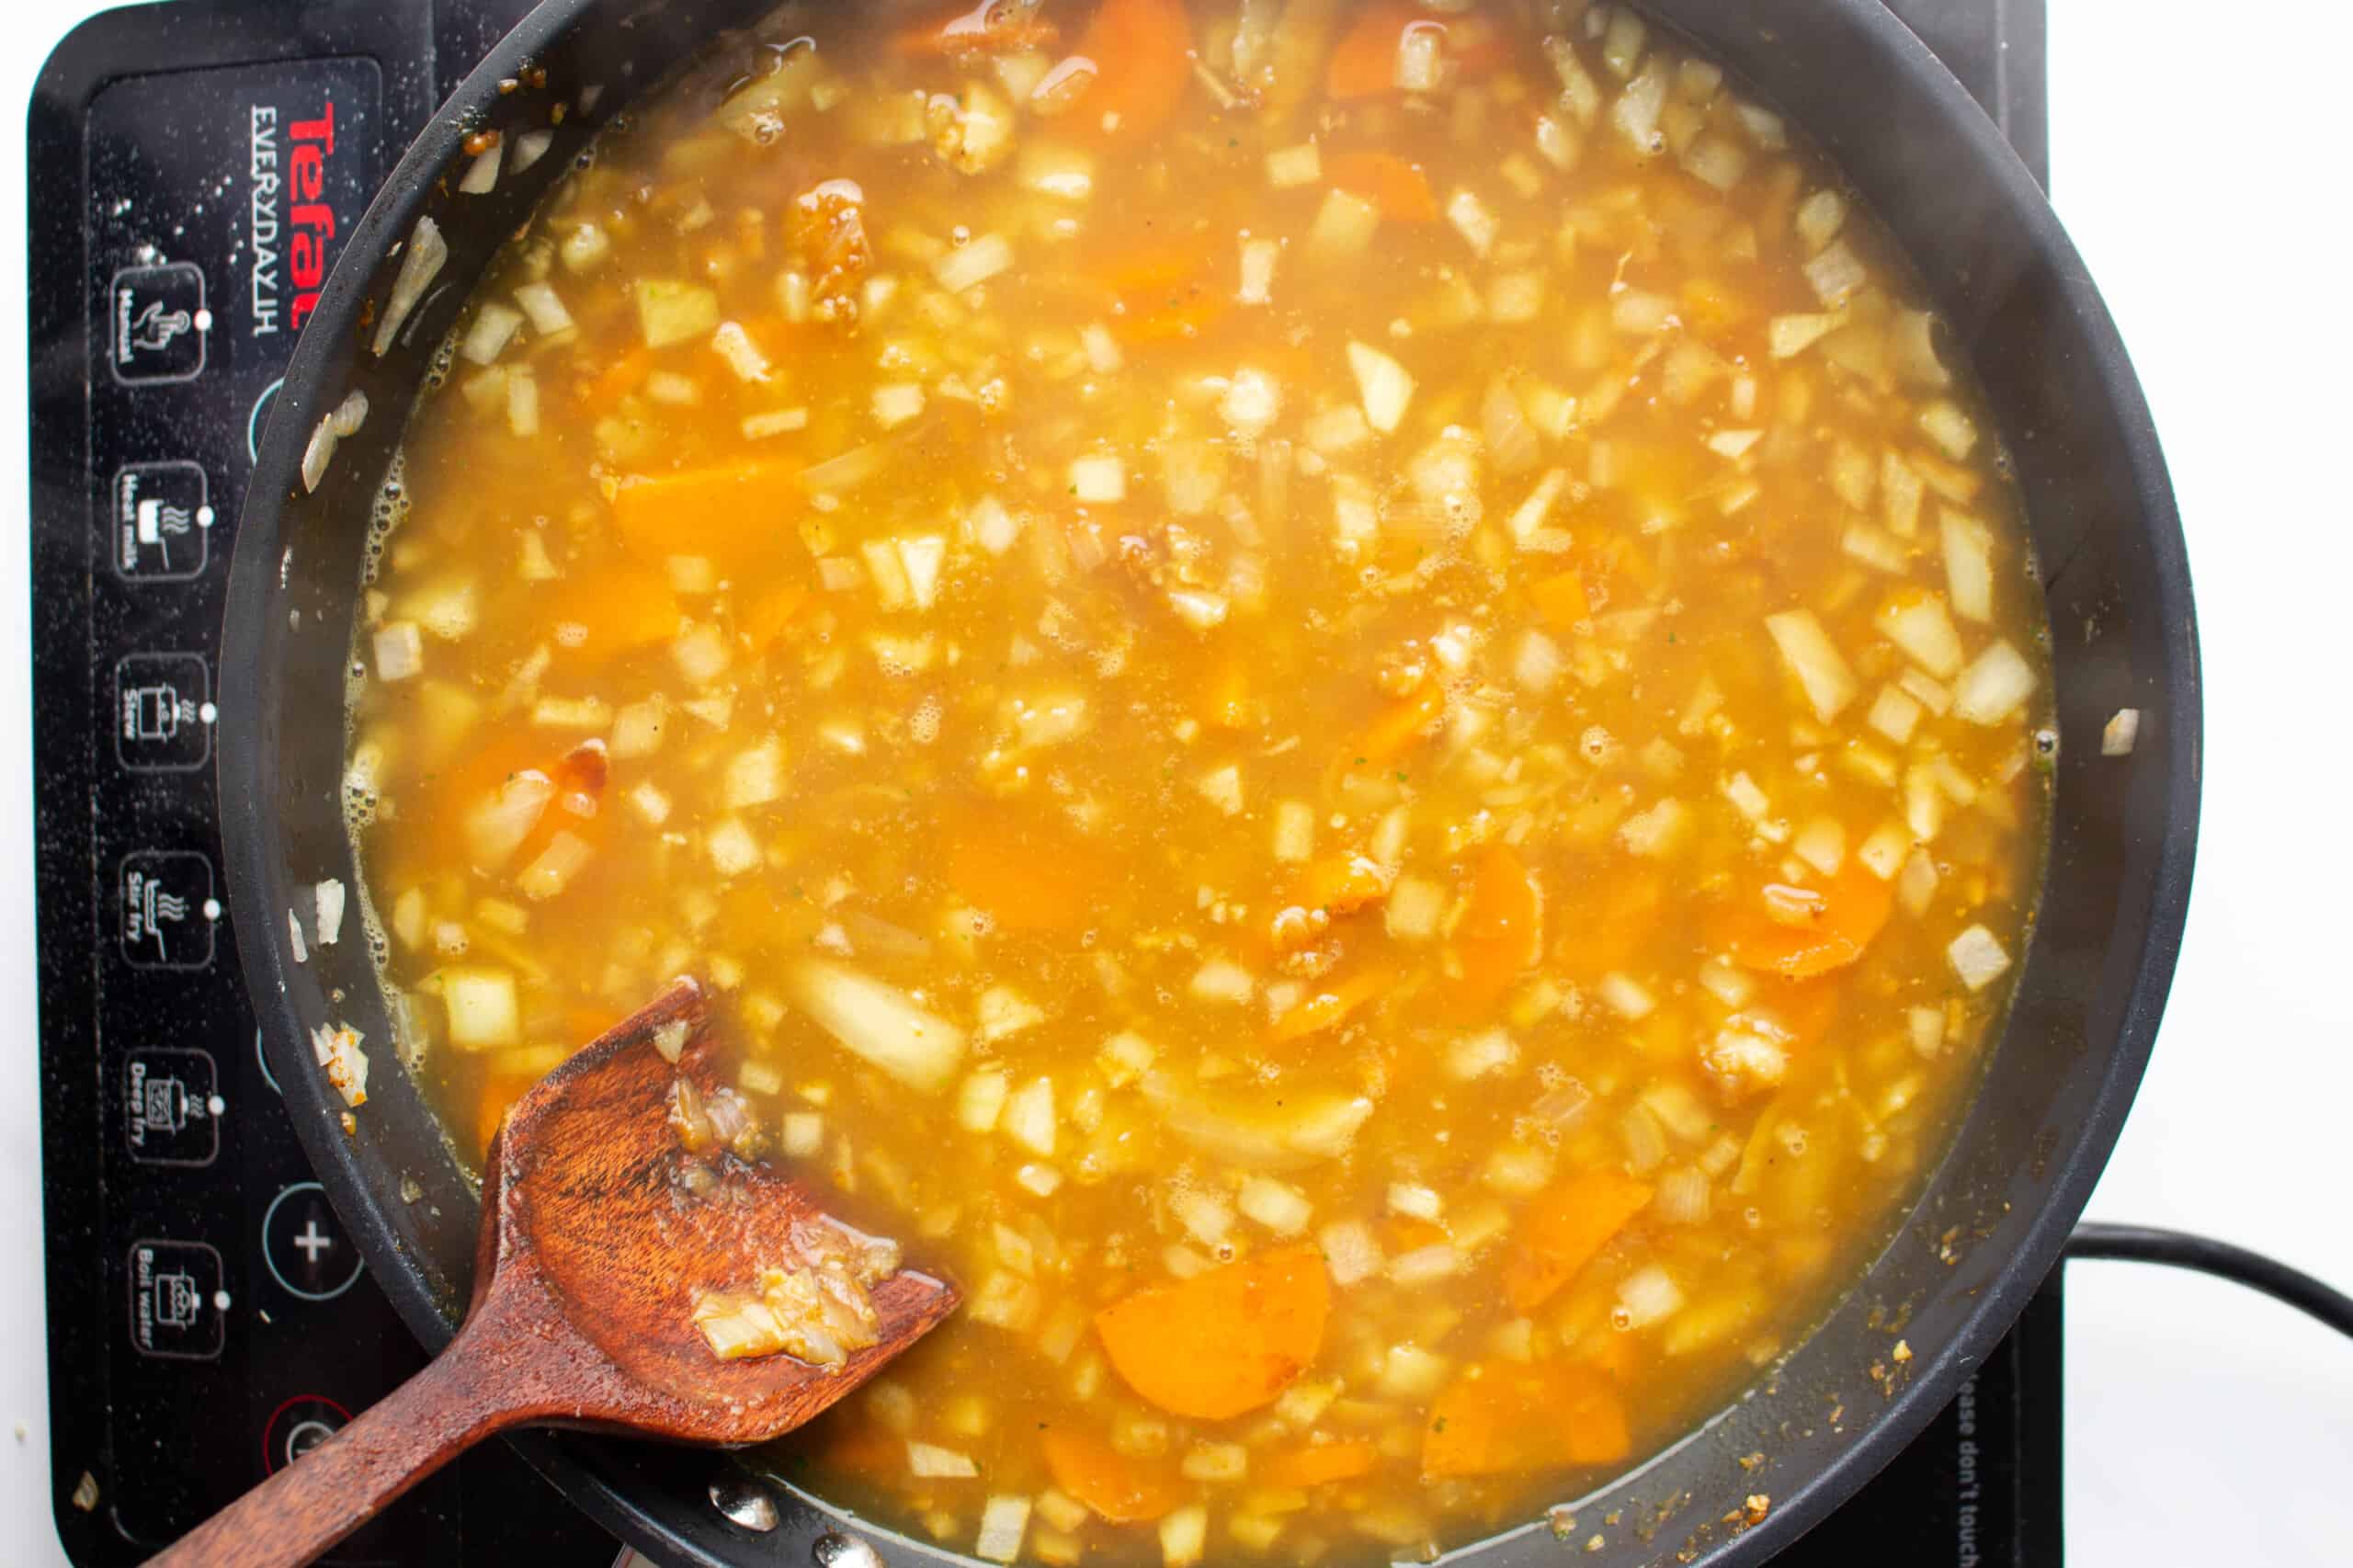 Carrots, onions and spices with chicken stock in pan